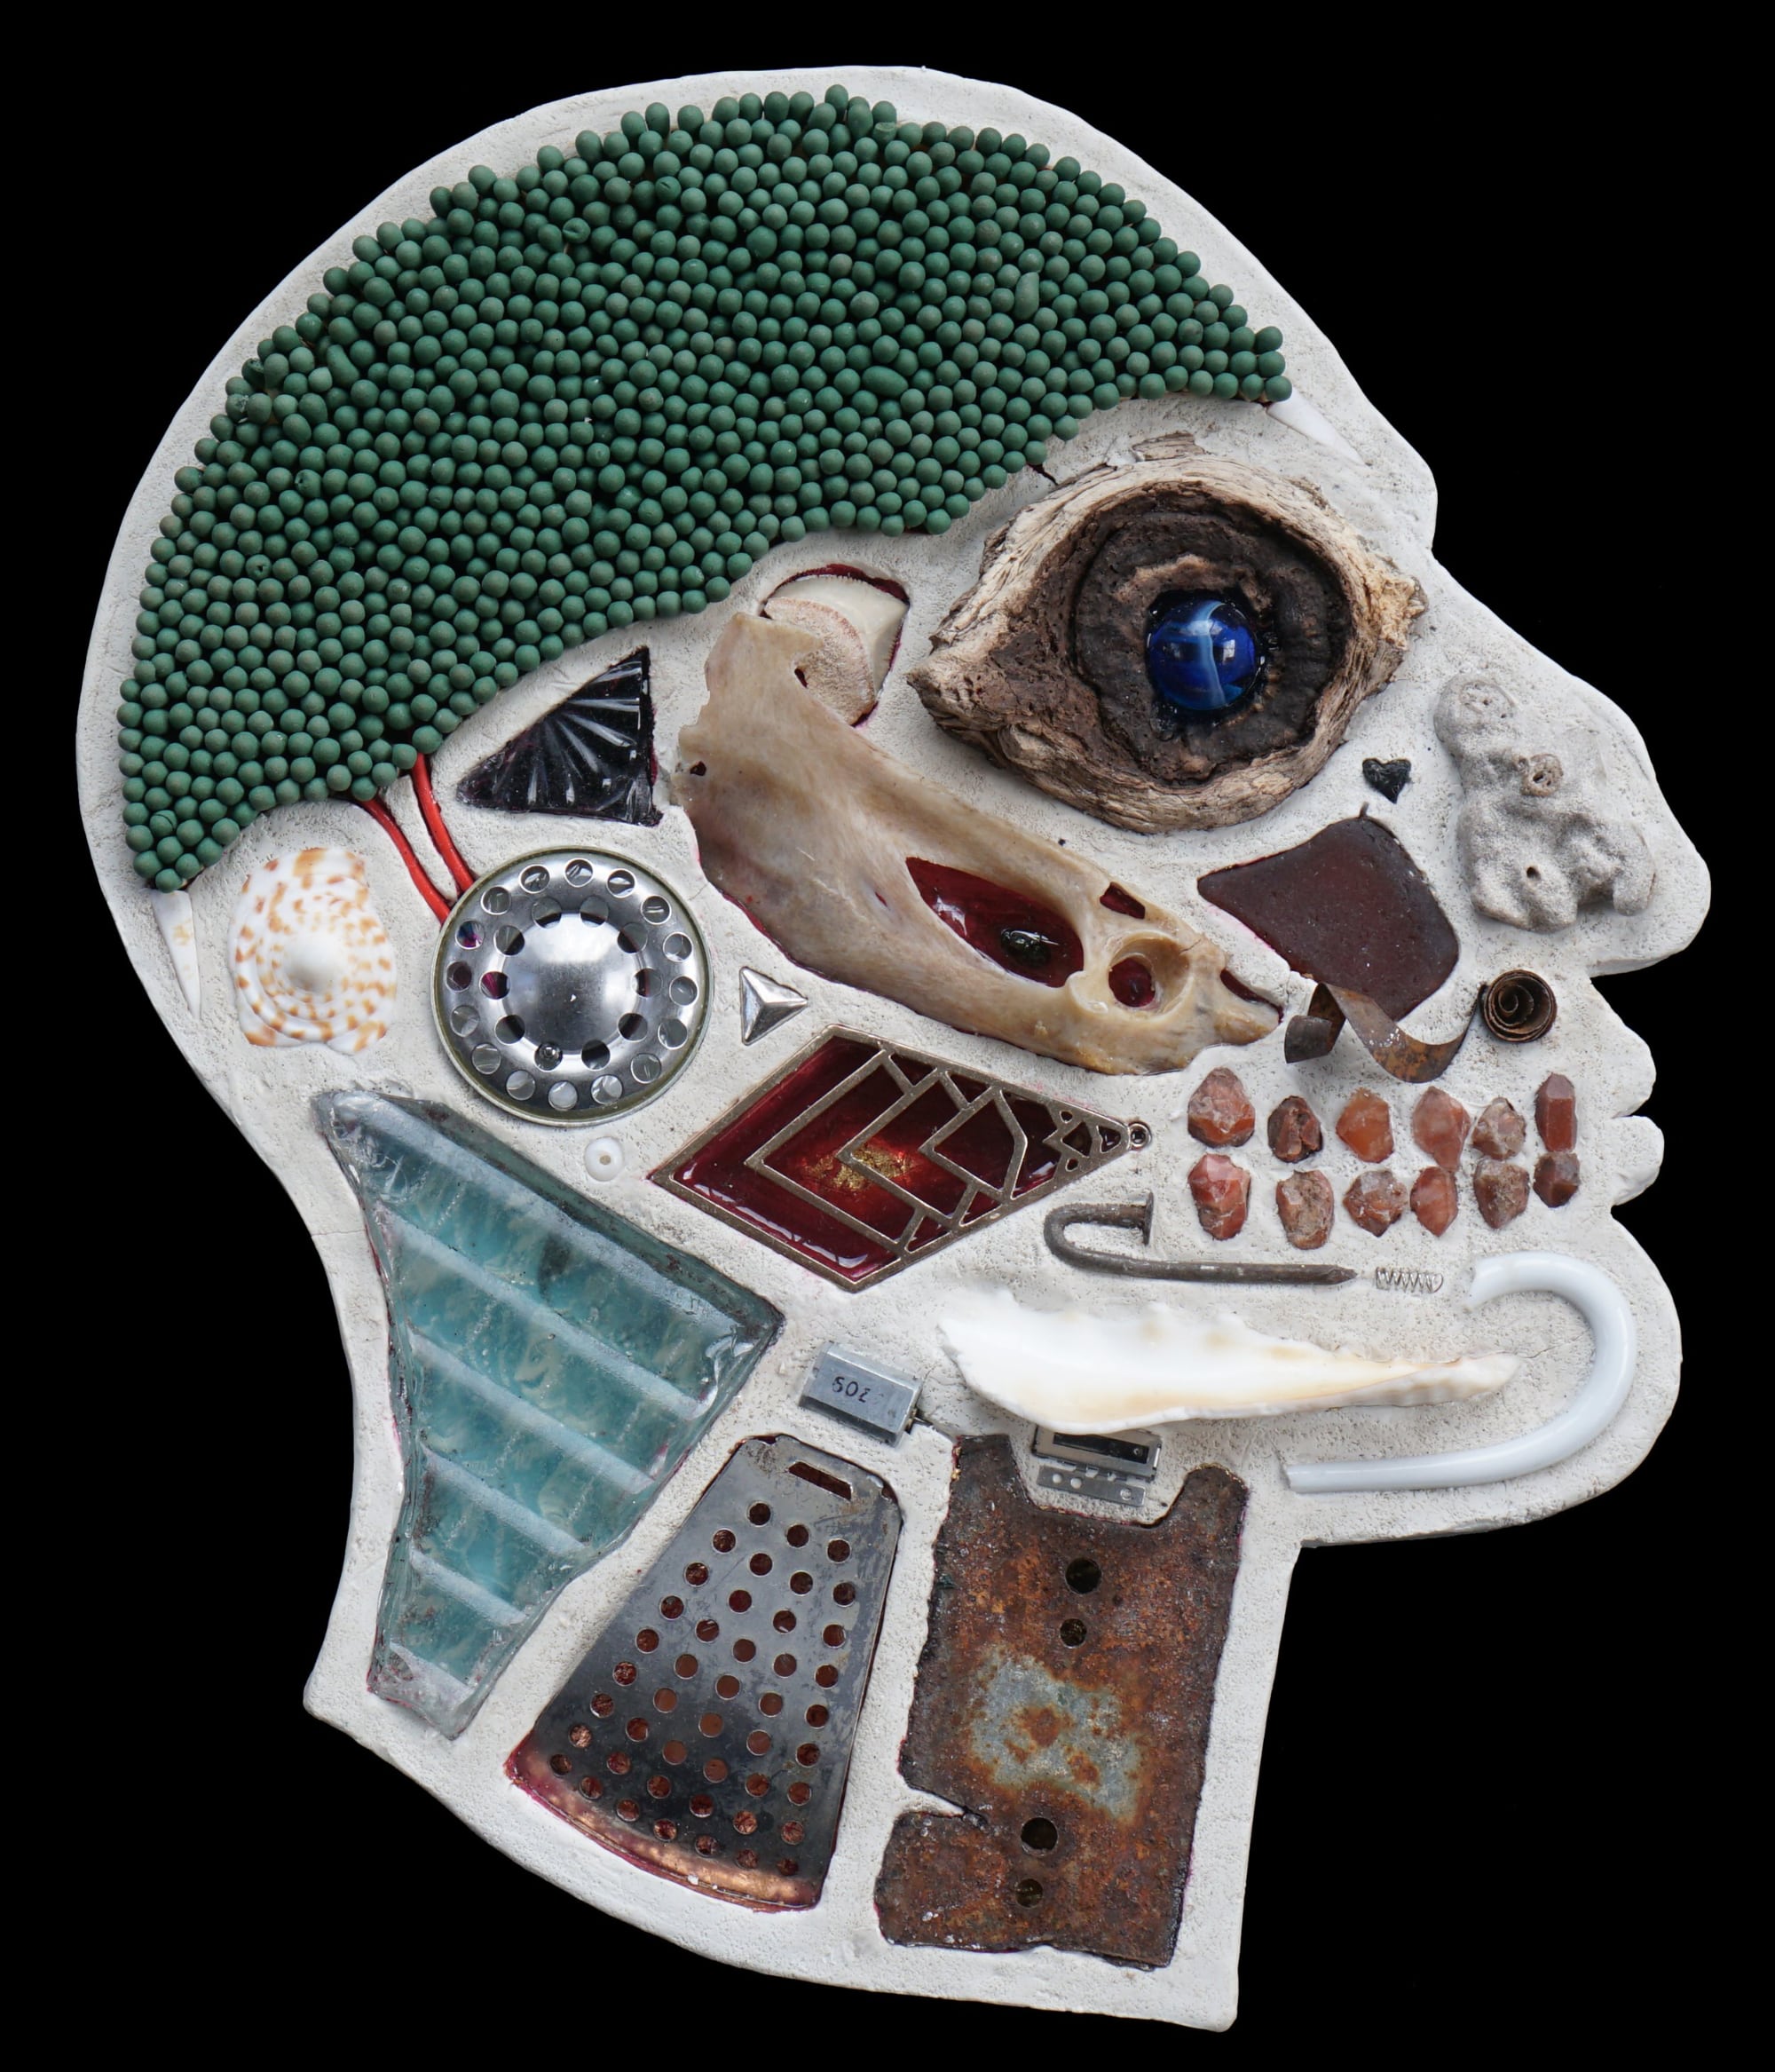 An anatomical sculpture of a head filled with found objects